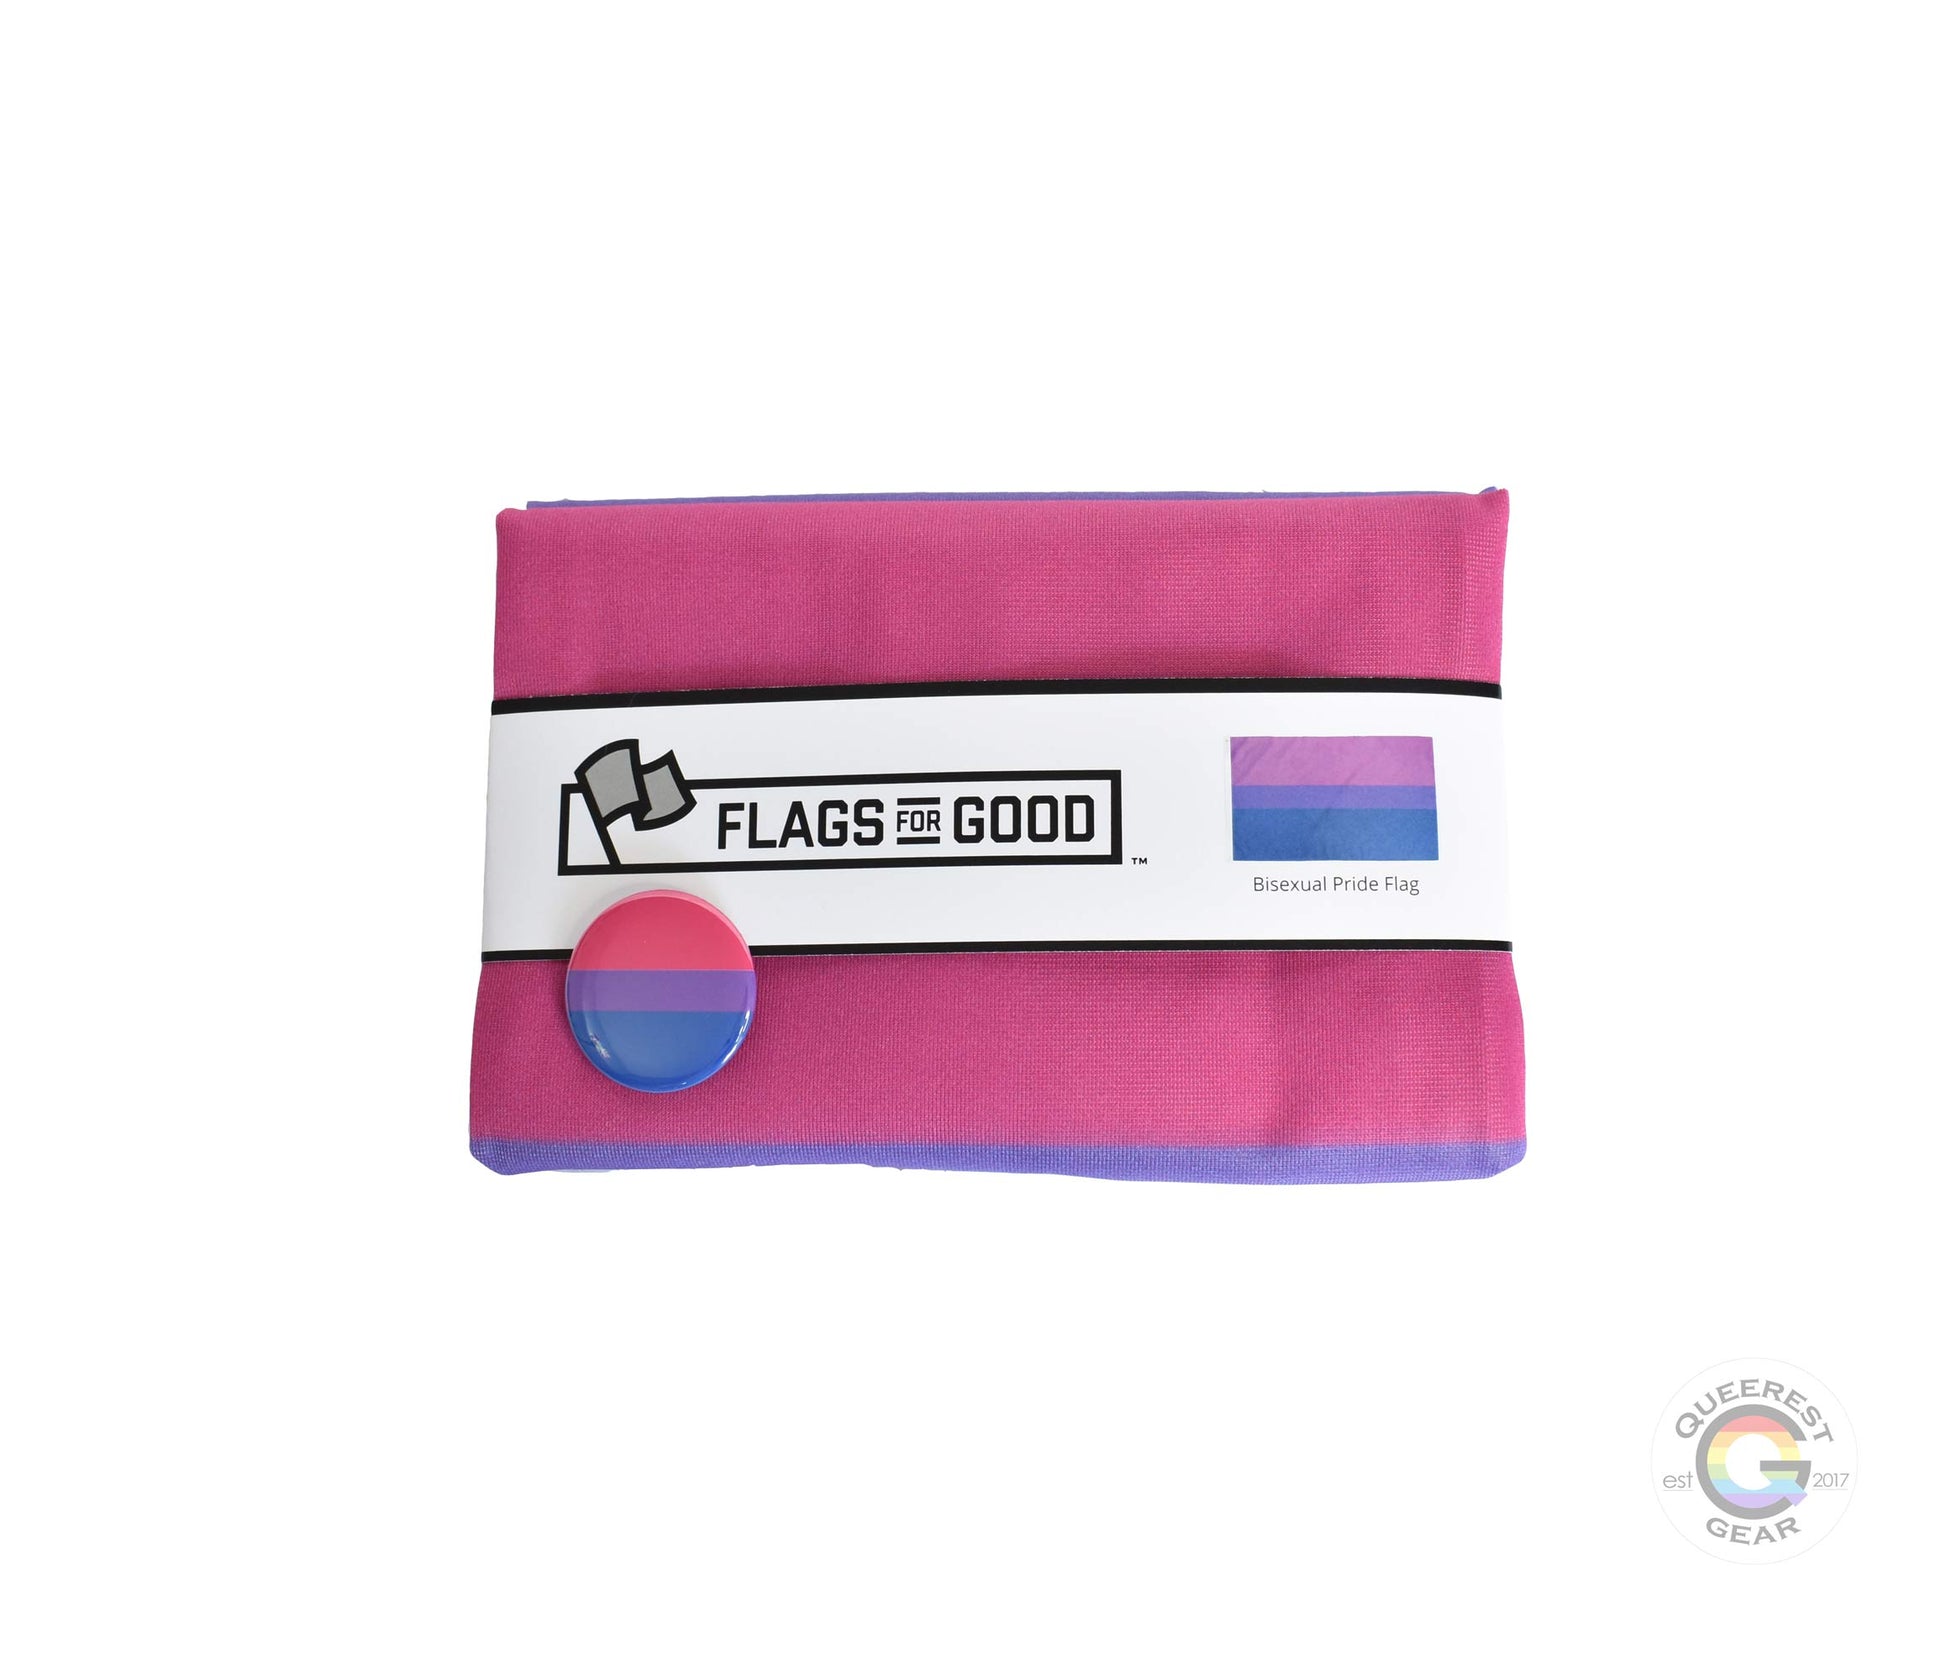 The bisexual pride flag folded in its packaging with the matching free bisexual flag button